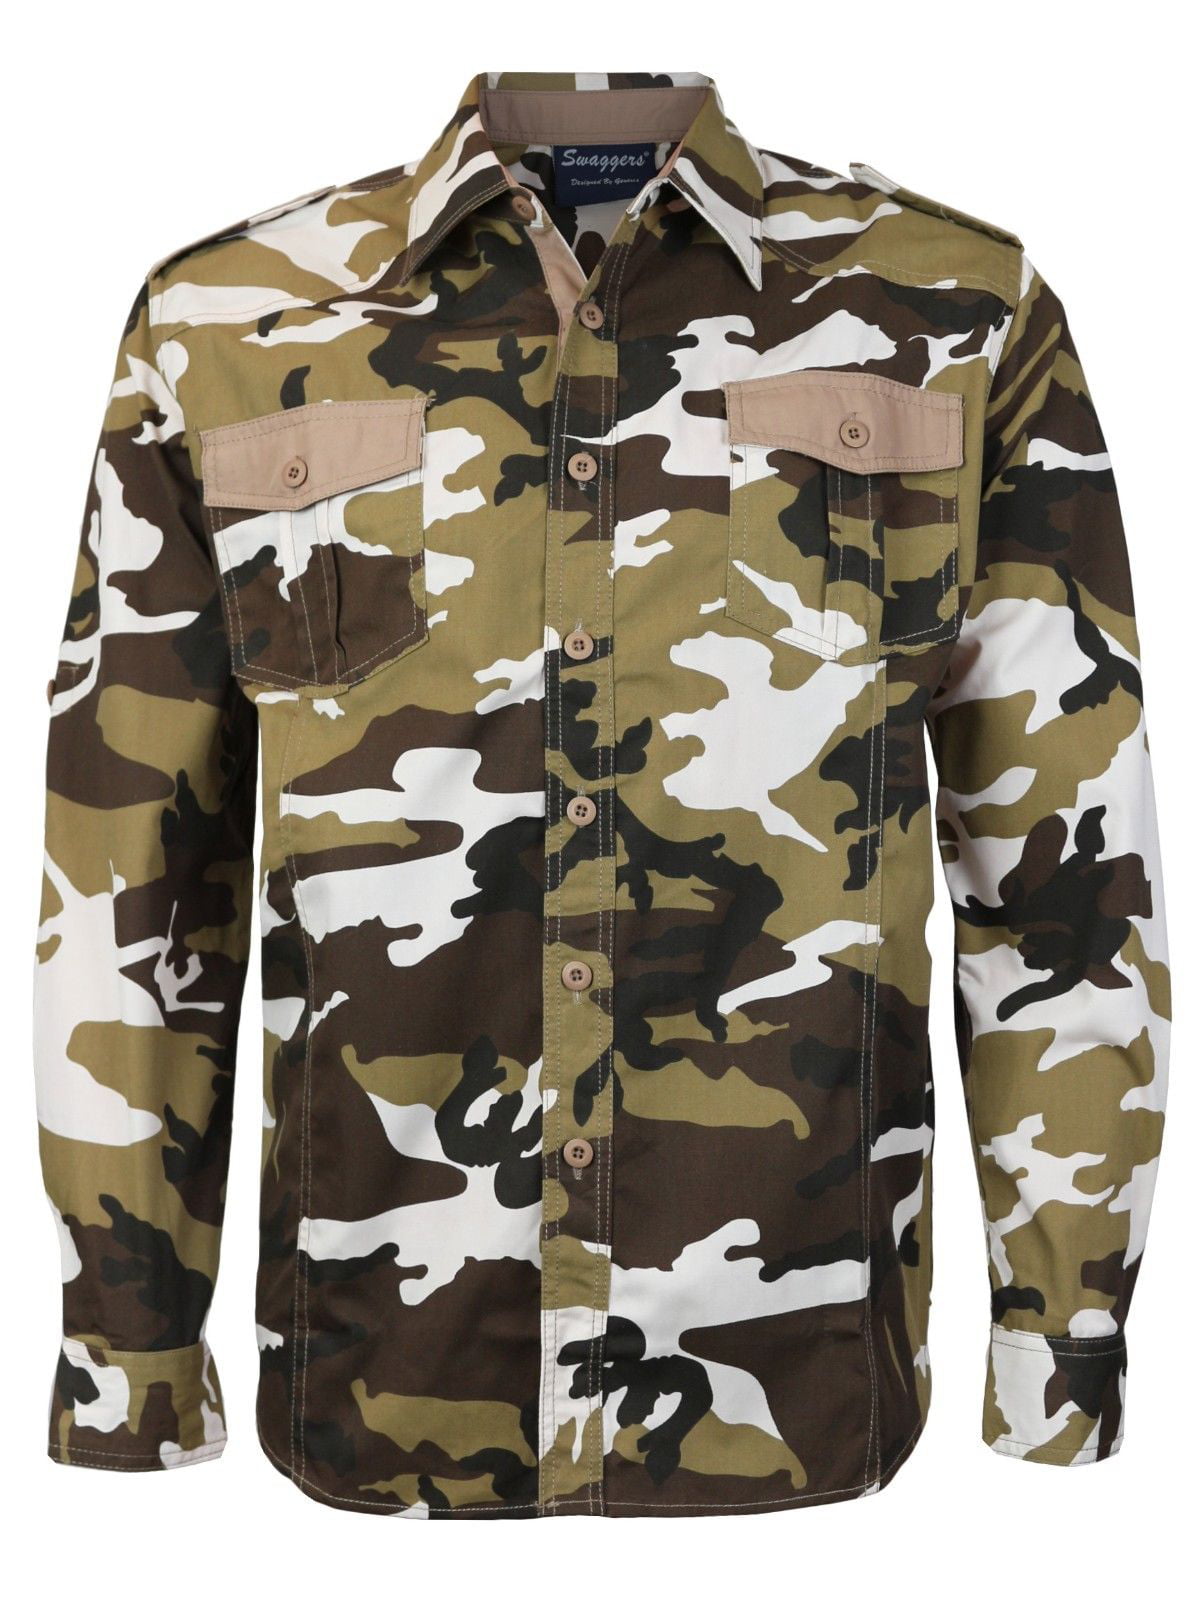 Mens Shirt Lapel Long Sleeve Camouflage Printing Casual Front Button Business Party Popular